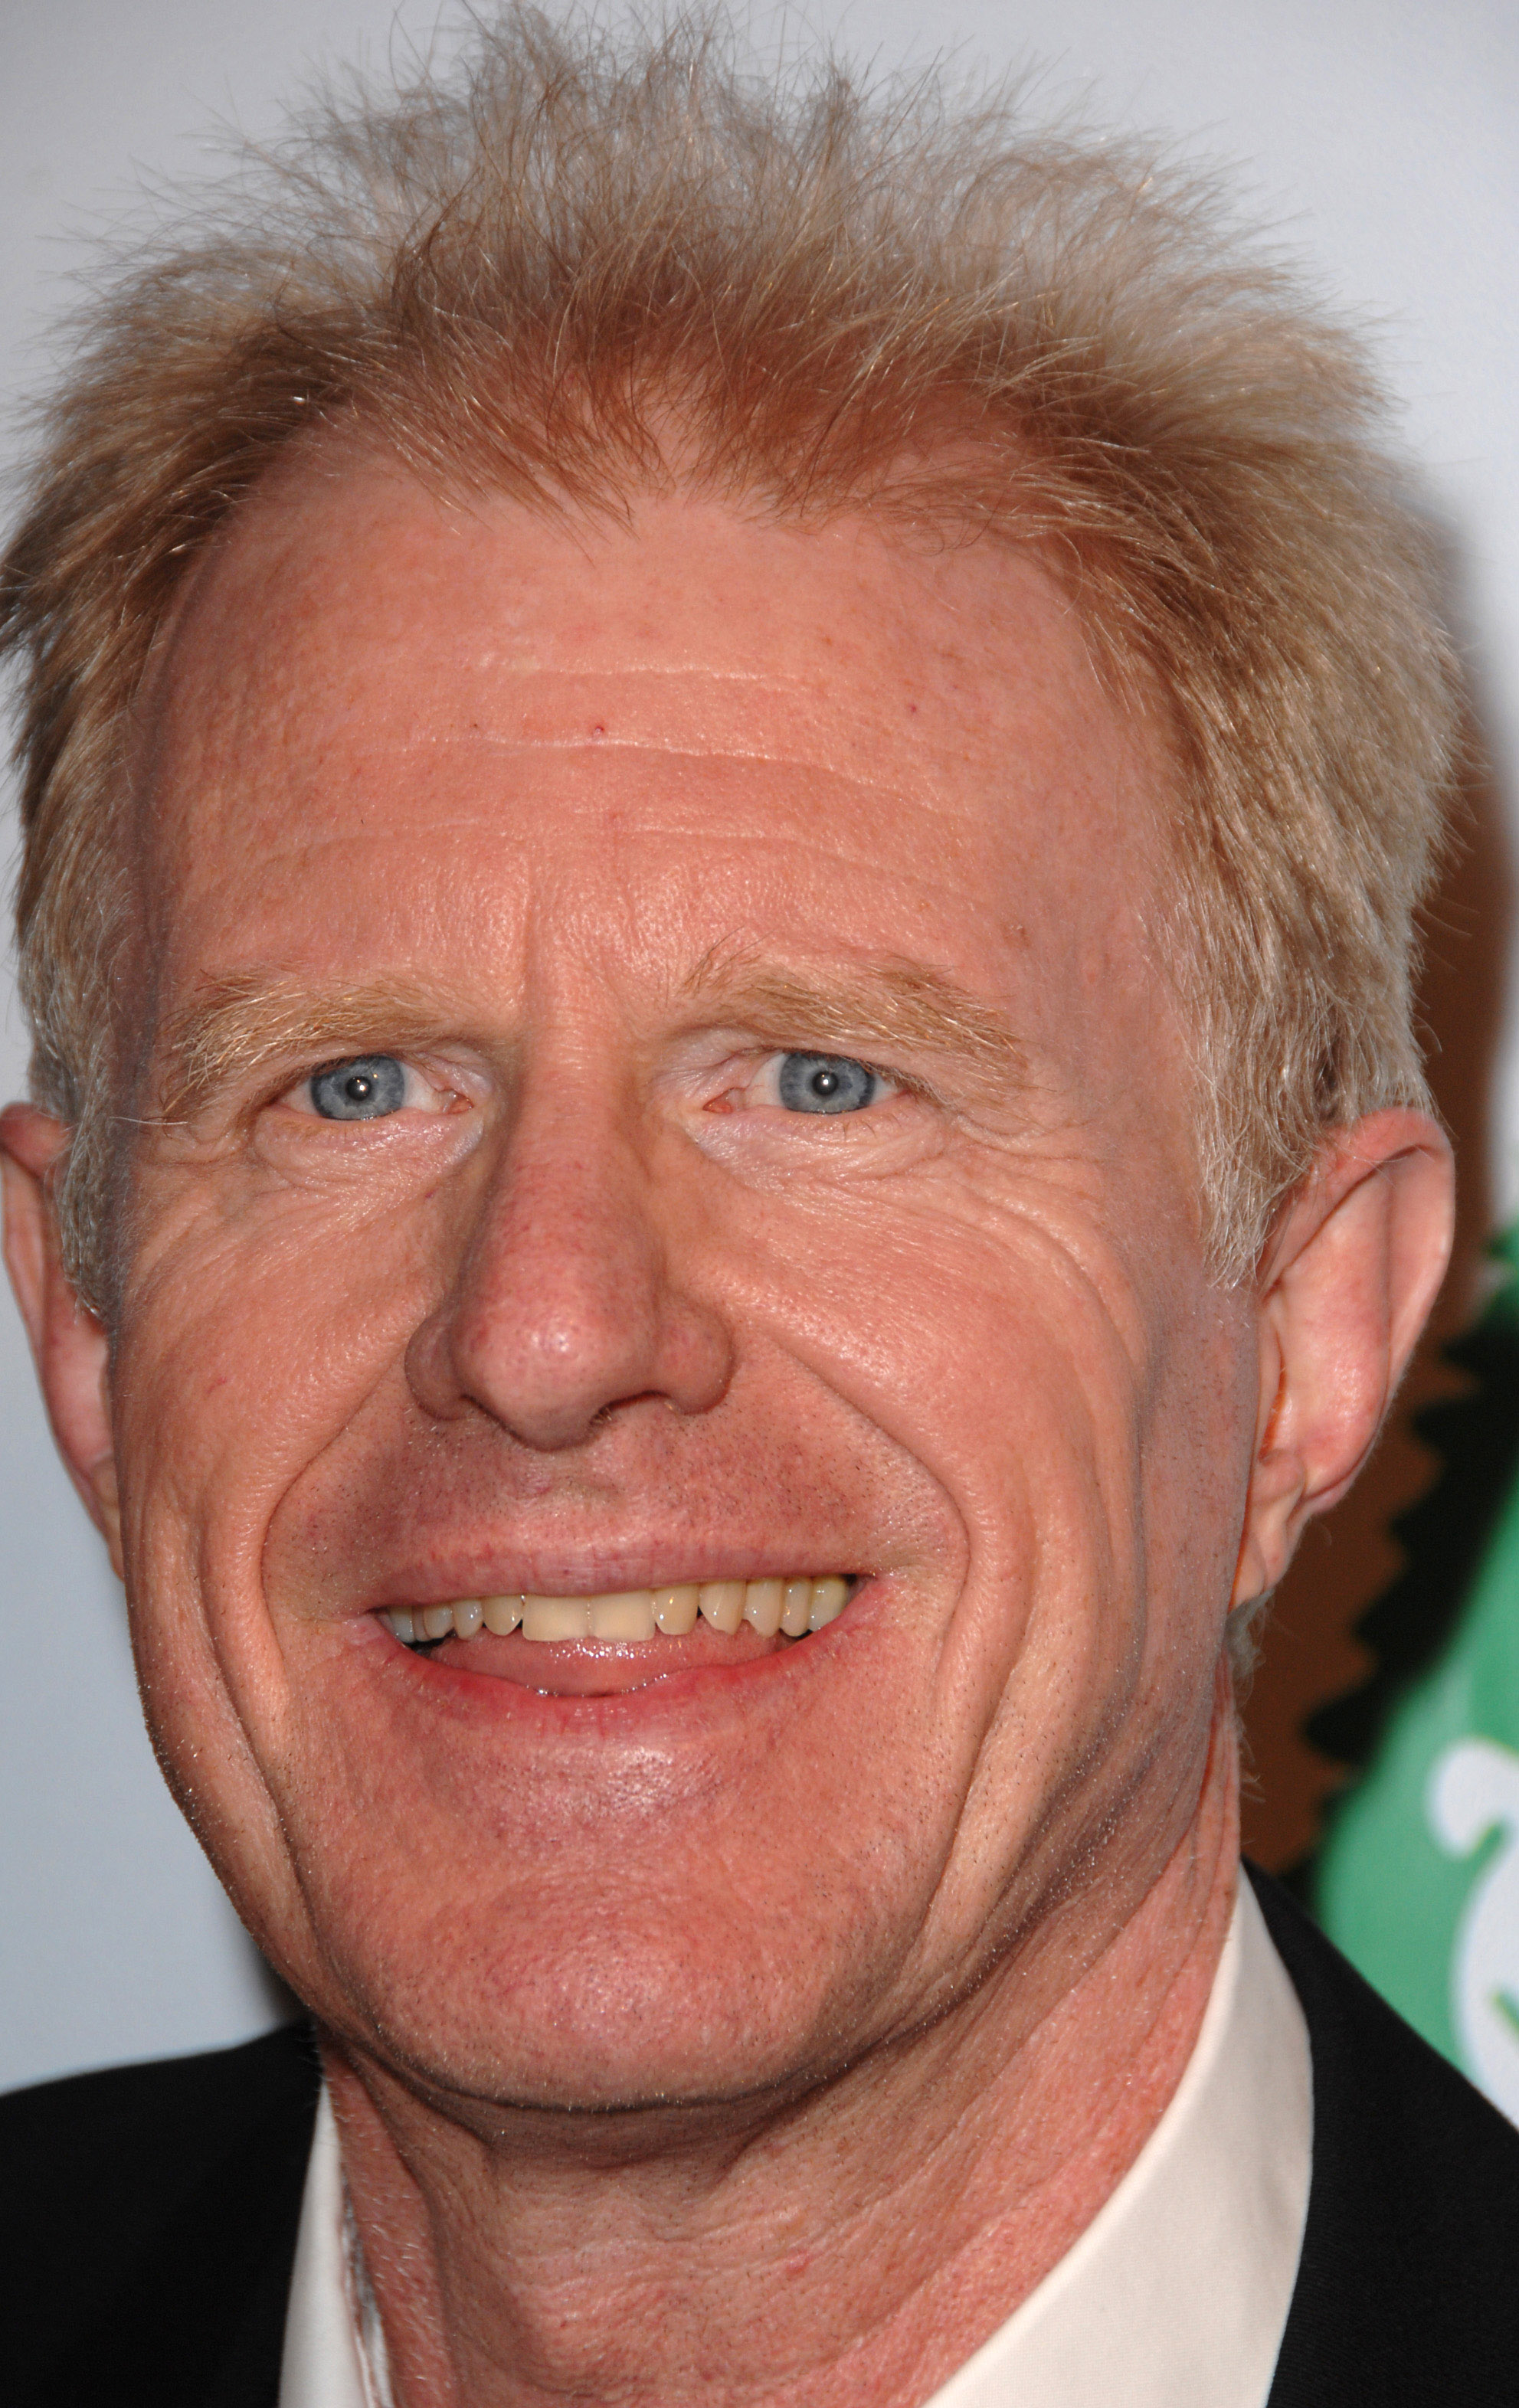 Ed Begley Jr. at the Natural Resources Defense Council's 20th Anniversary Celebration in Beverly Hills, California on April 25, 2009 | Source: Getty Images